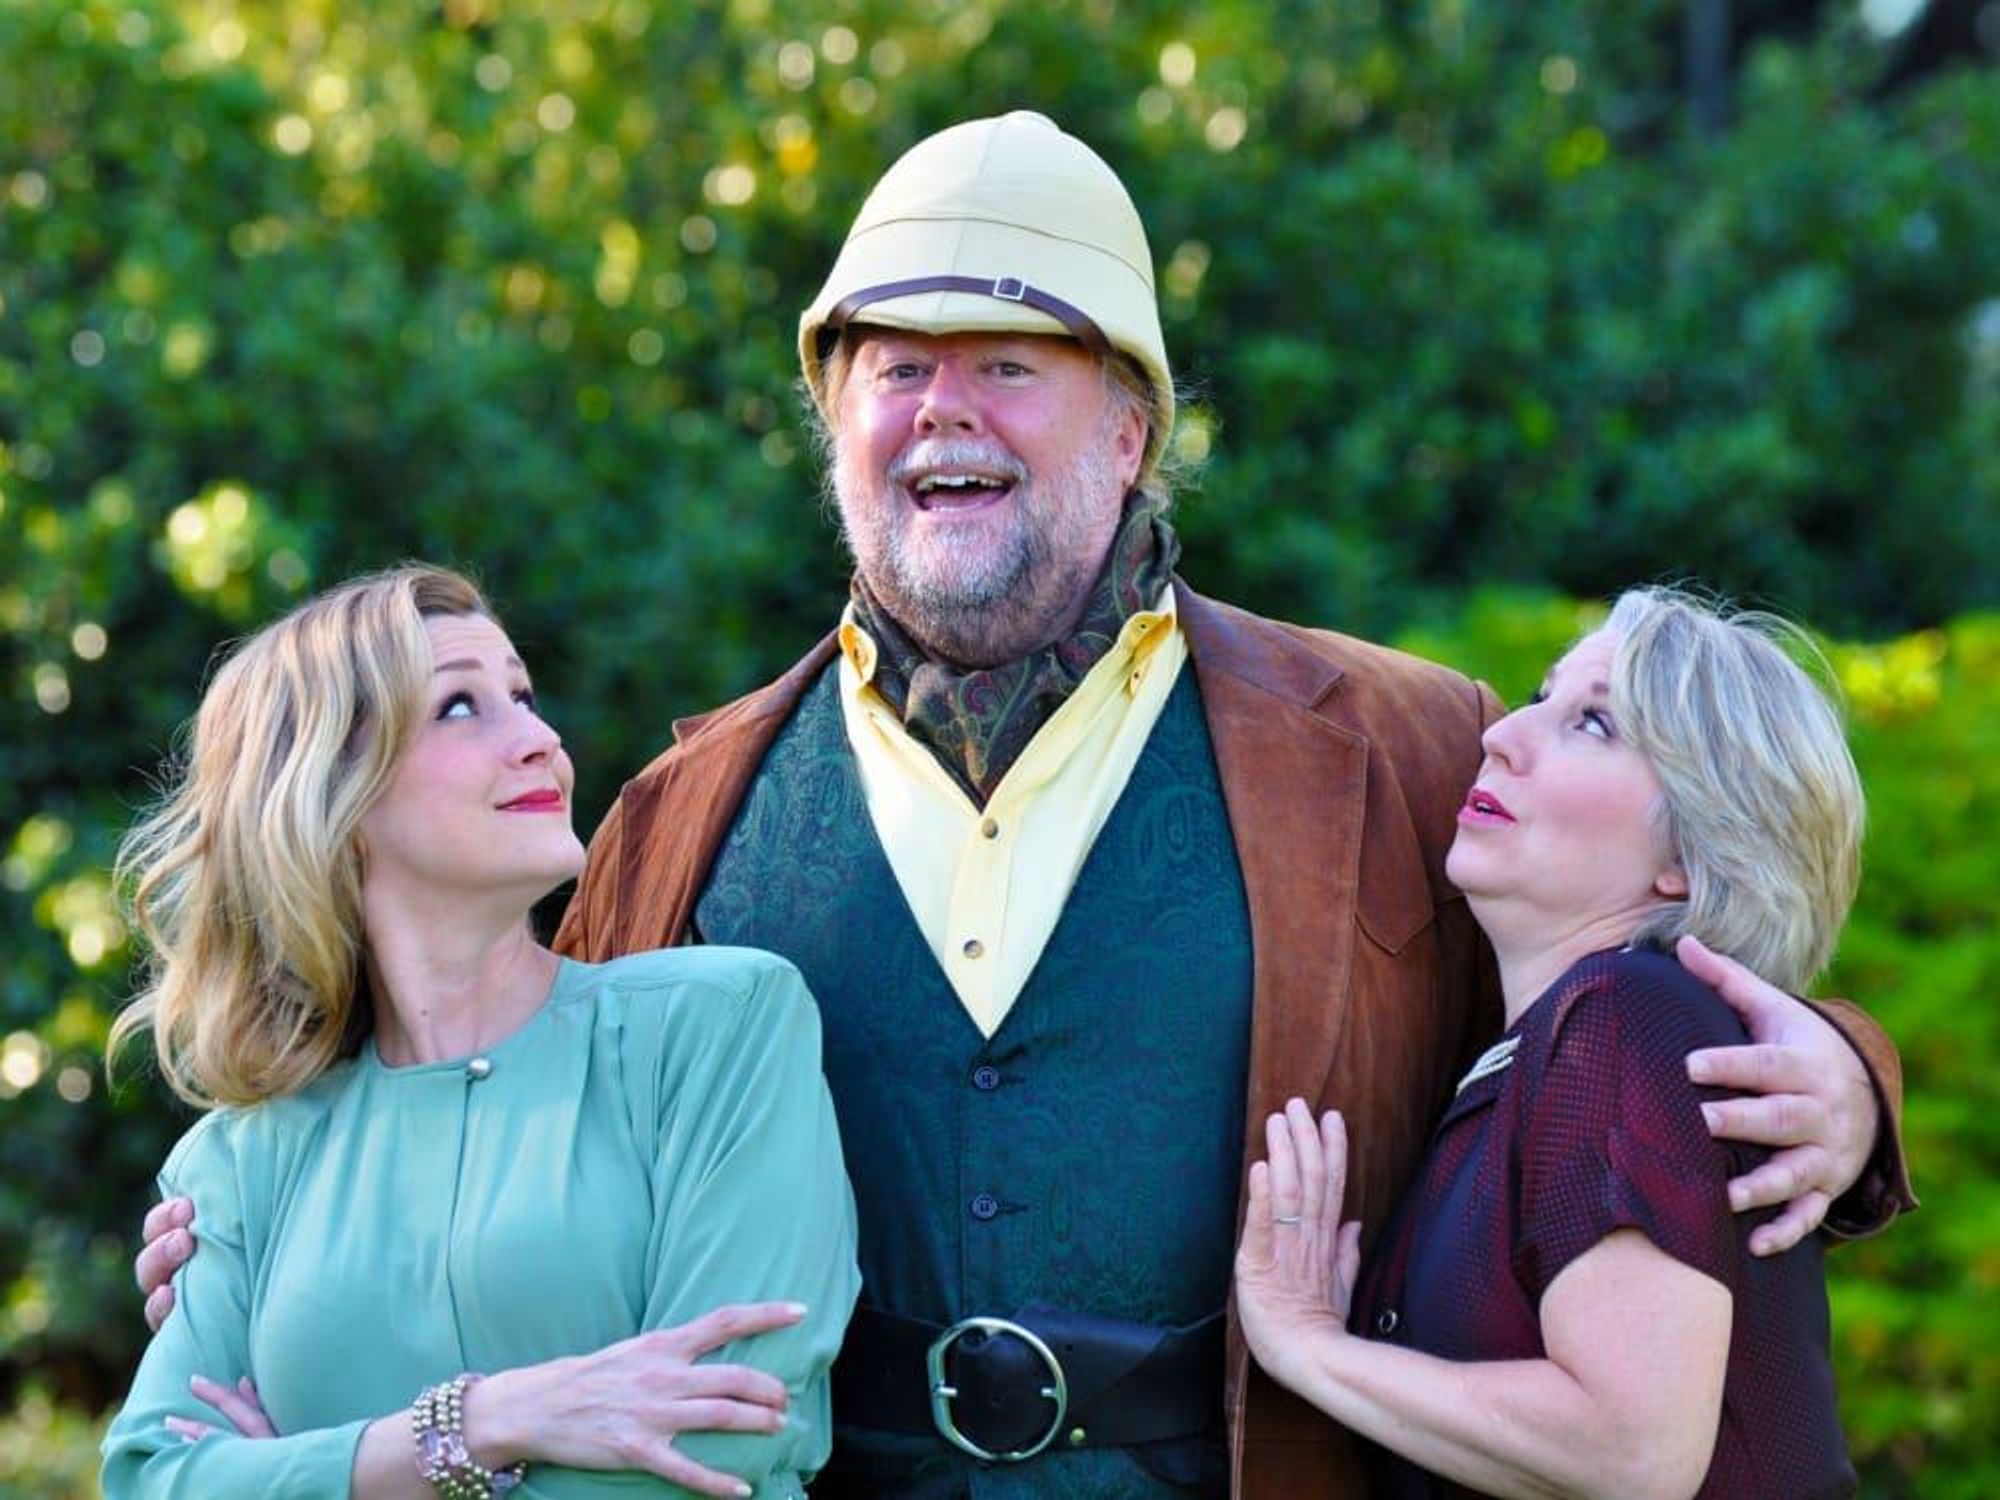 Shakespeare Dallas presents The Merry Wives of Windsor